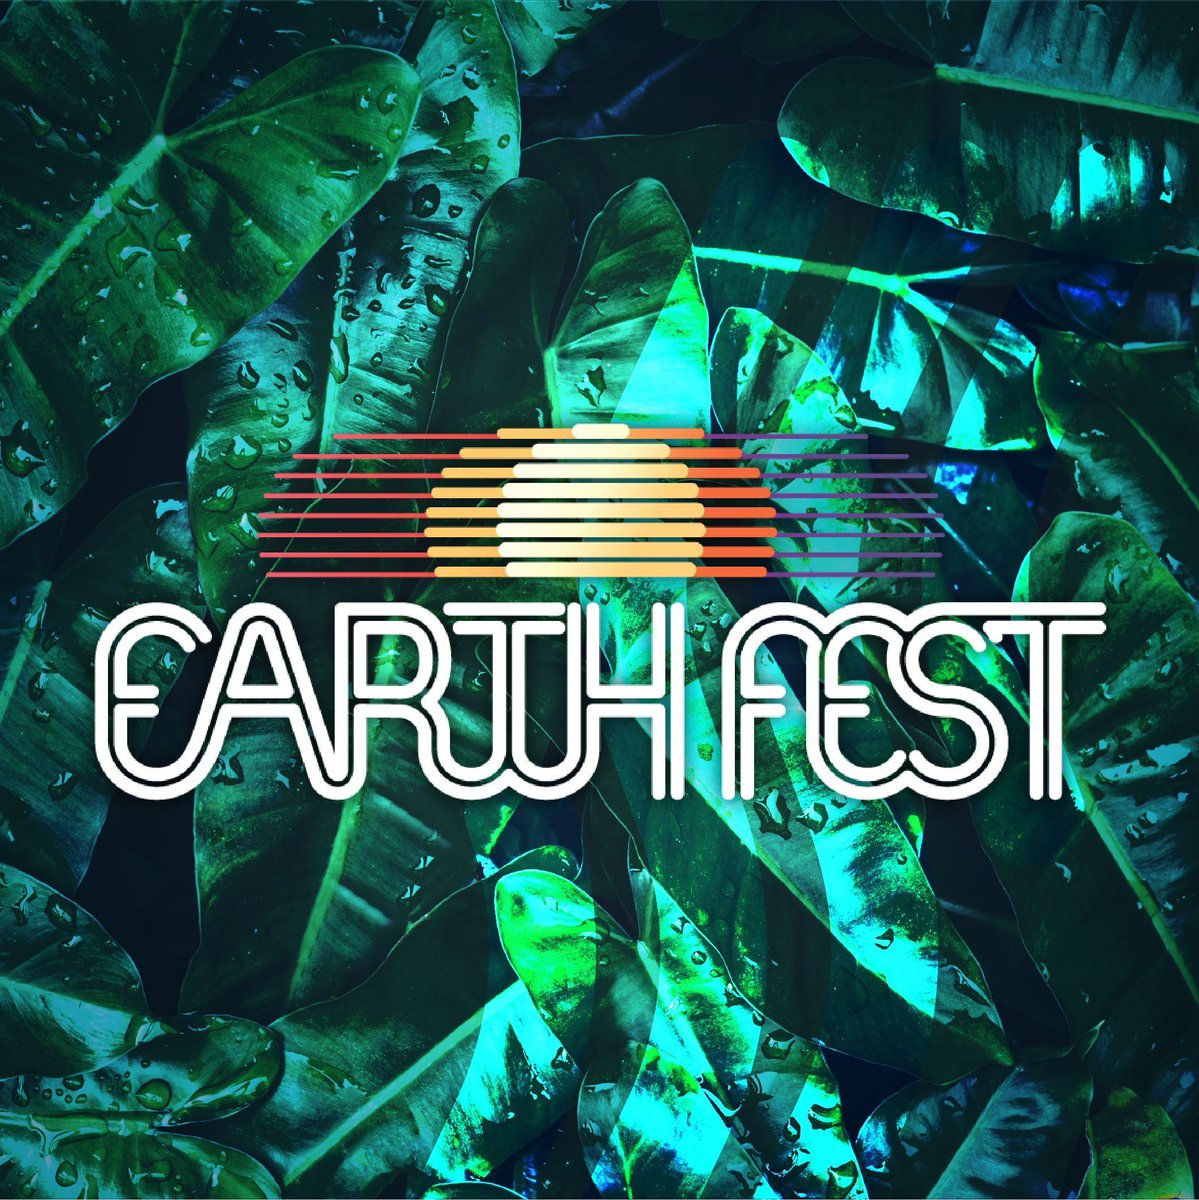 We're proud to support the inaugural UW–Madison Earth Fest! Hosted by @nelsoninstitute and @sustainuw, Earth Fest unites our campus over the one resource and interest we all share: our world. Learn more at buff.ly/43gr9El